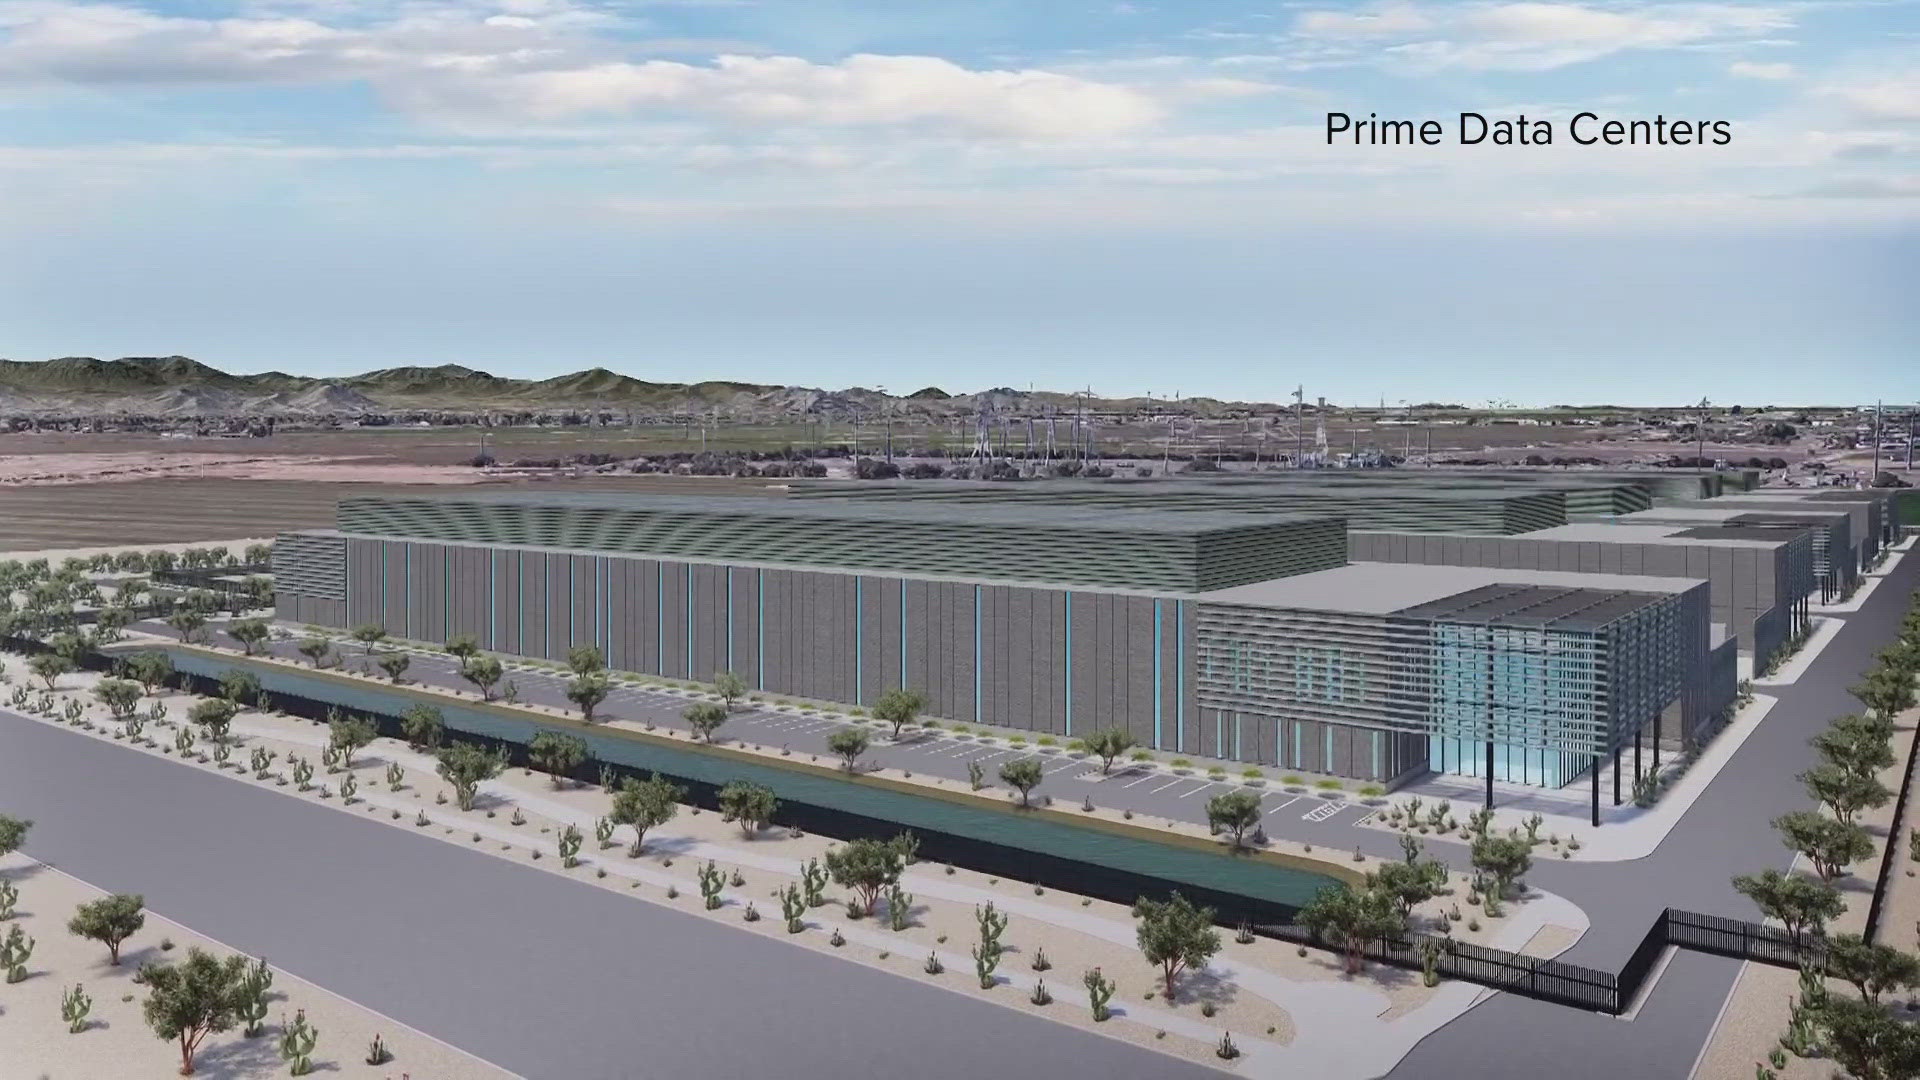 The city of Avondale will soon be the home of a new Prime Data Center. Here's what officials are saying about the project.